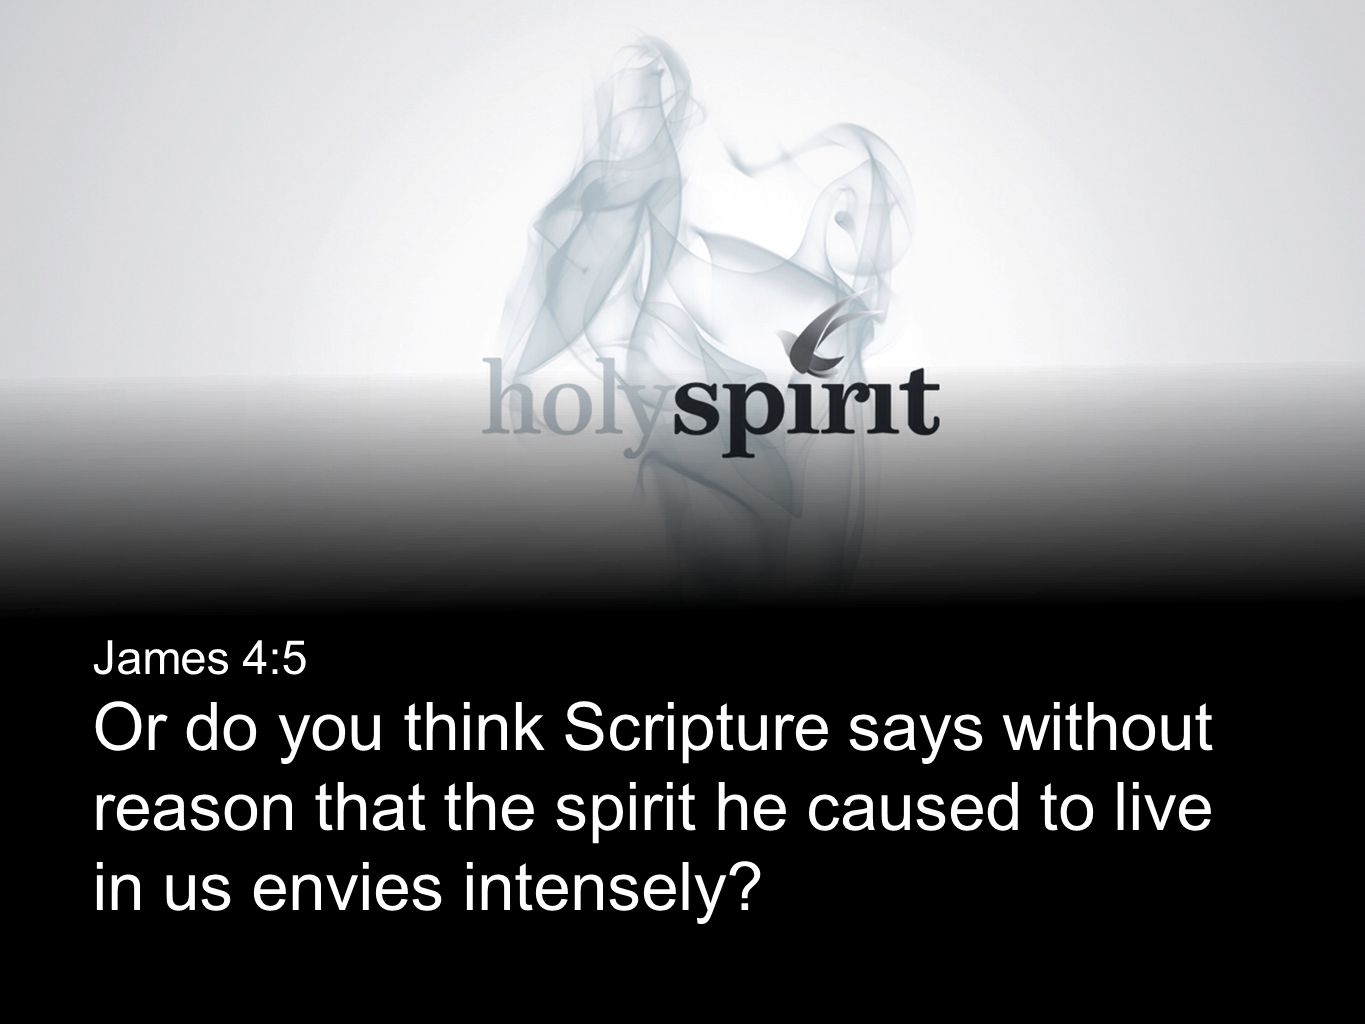 James 4:5 Or do you think Scripture says without reason that the spirit he caused to live in us envies intensely